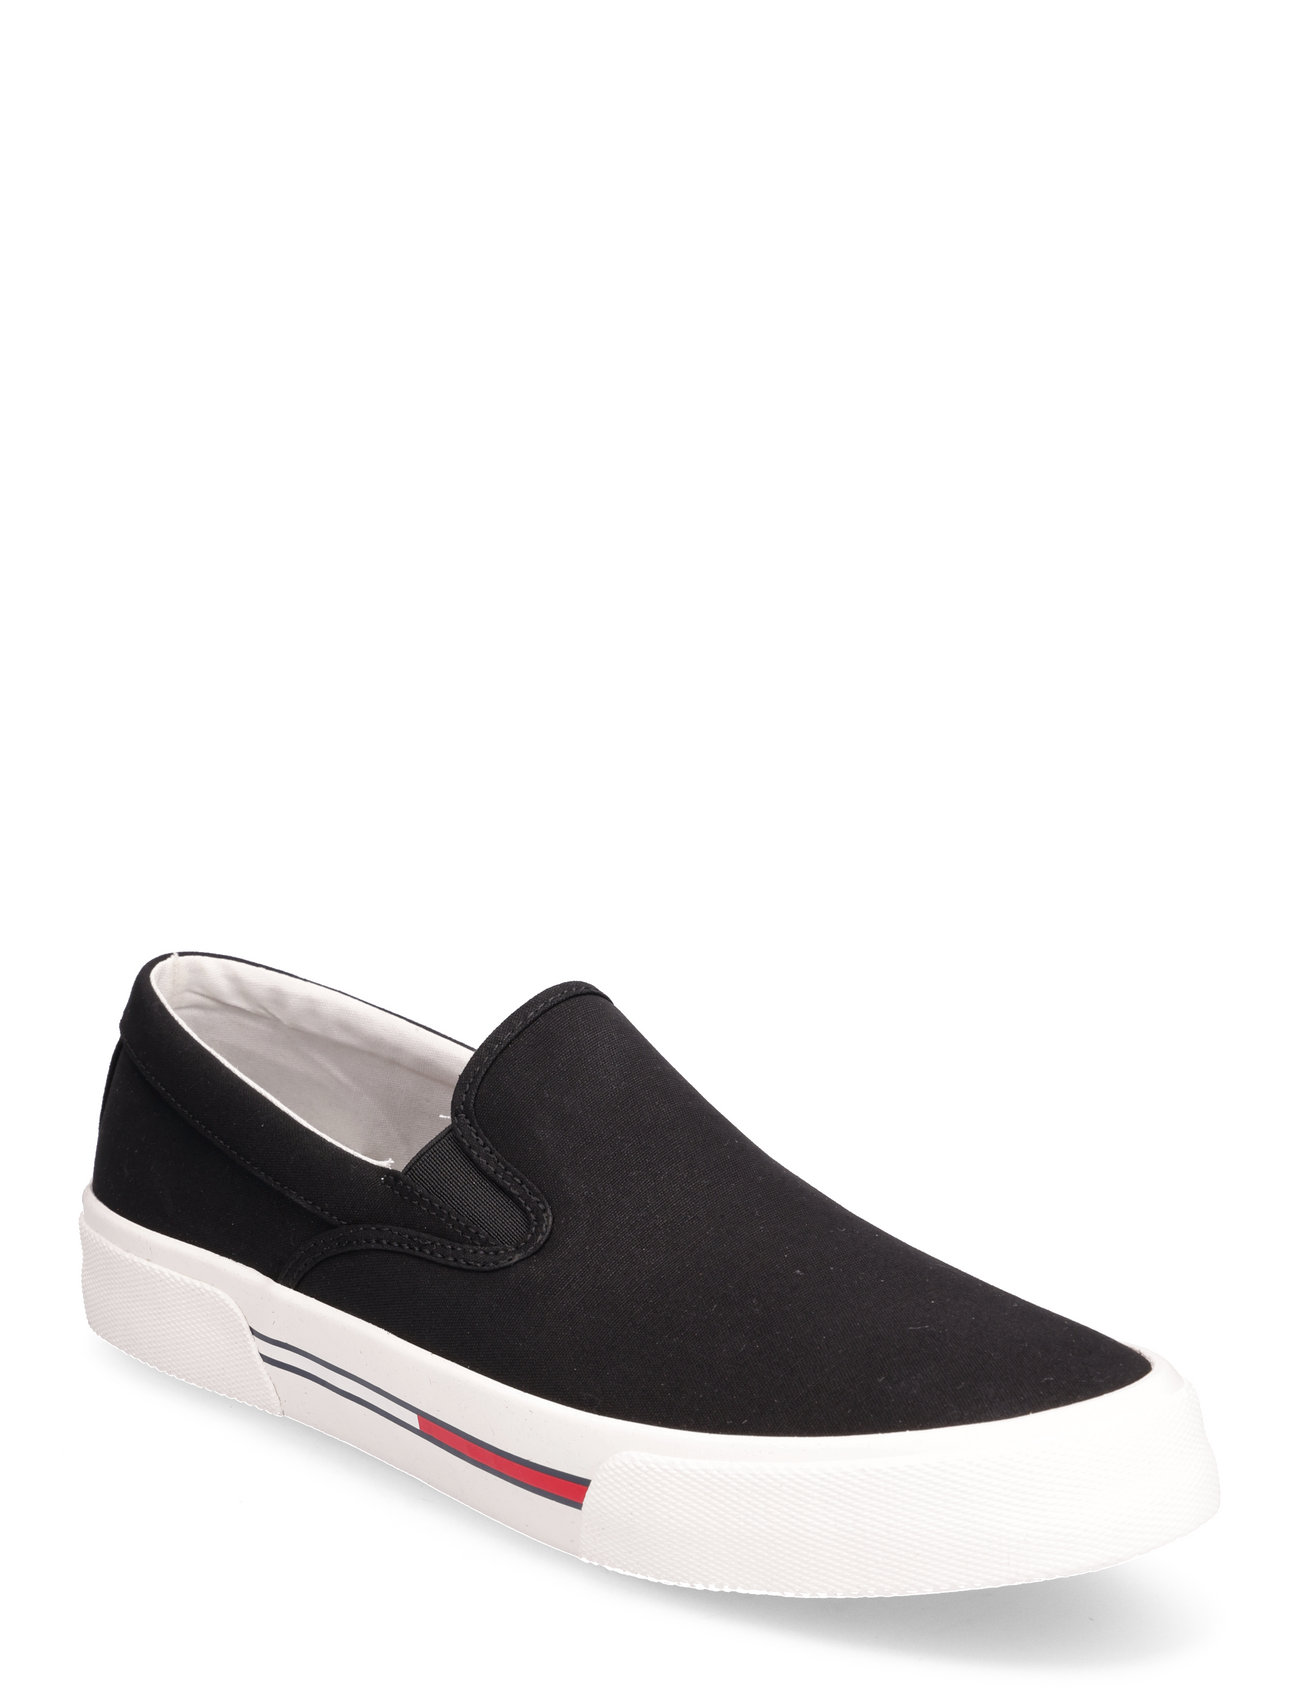 Hilfiger Tommy Jeans Slip On Canvas Color - Slip-on sneakers -